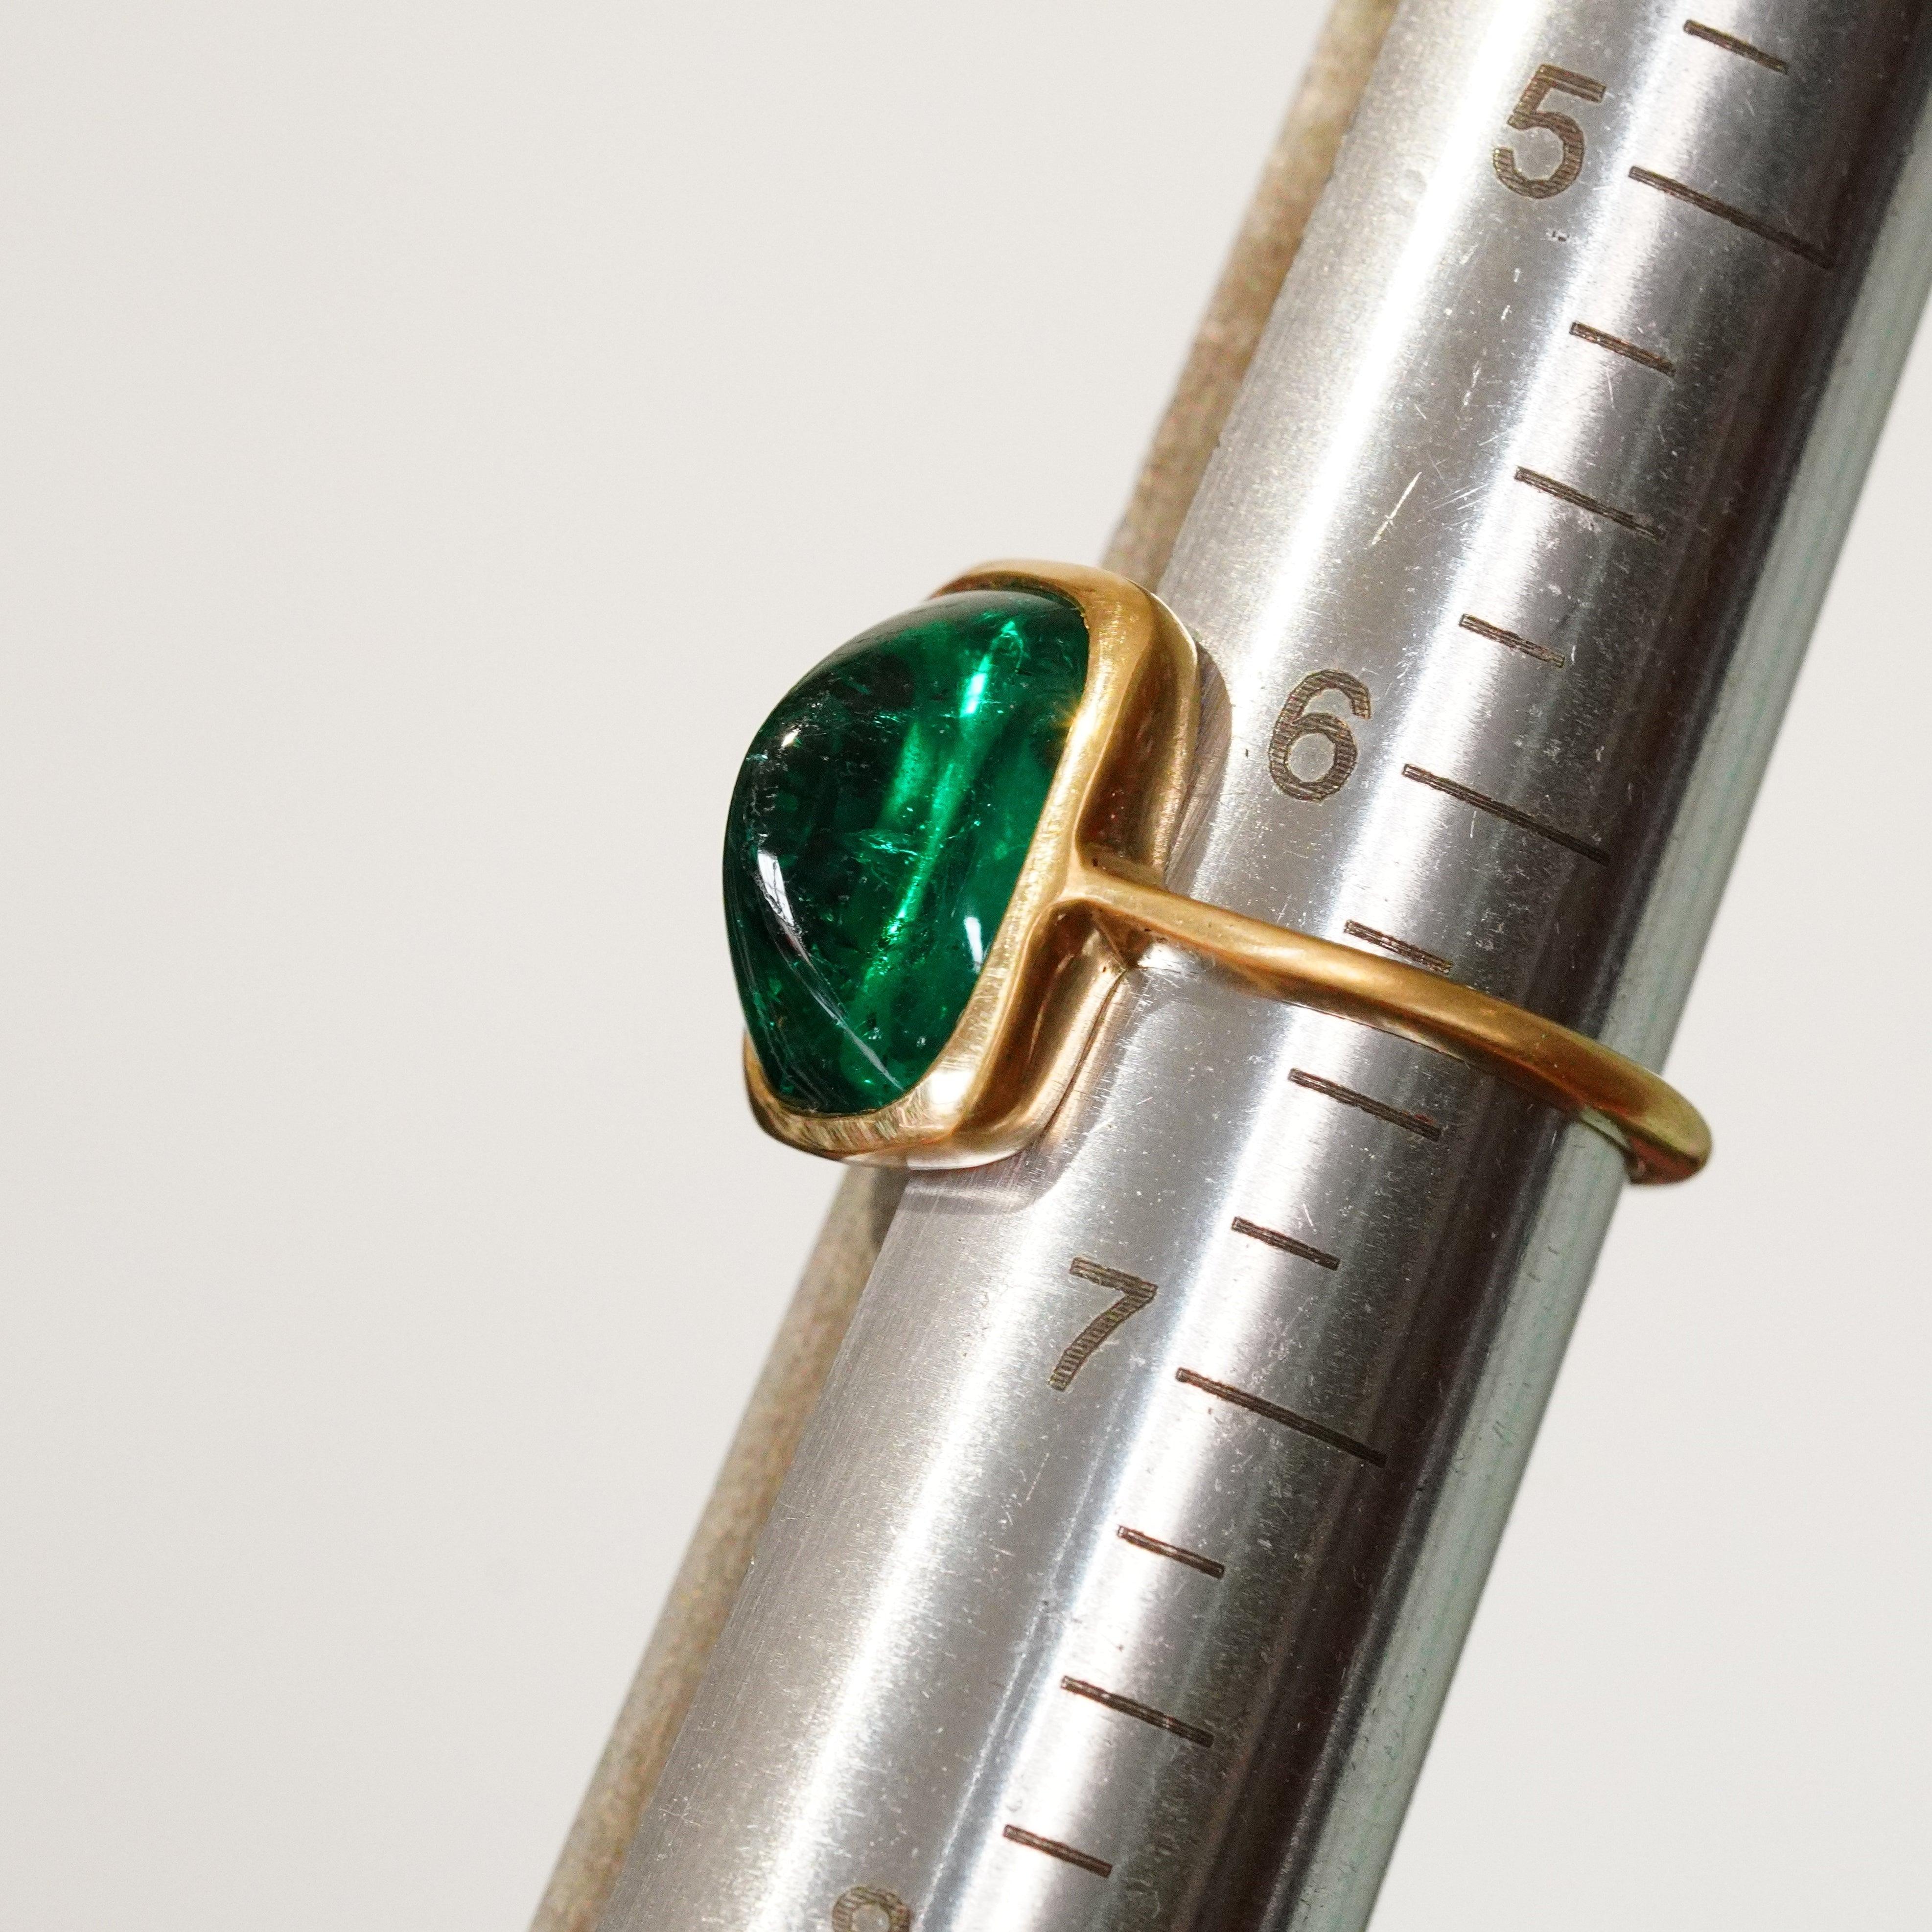 Exquisite 5.64 CT No Oil Colombian Emerald Sugarloaf Ring in 18K Gold - Jogani